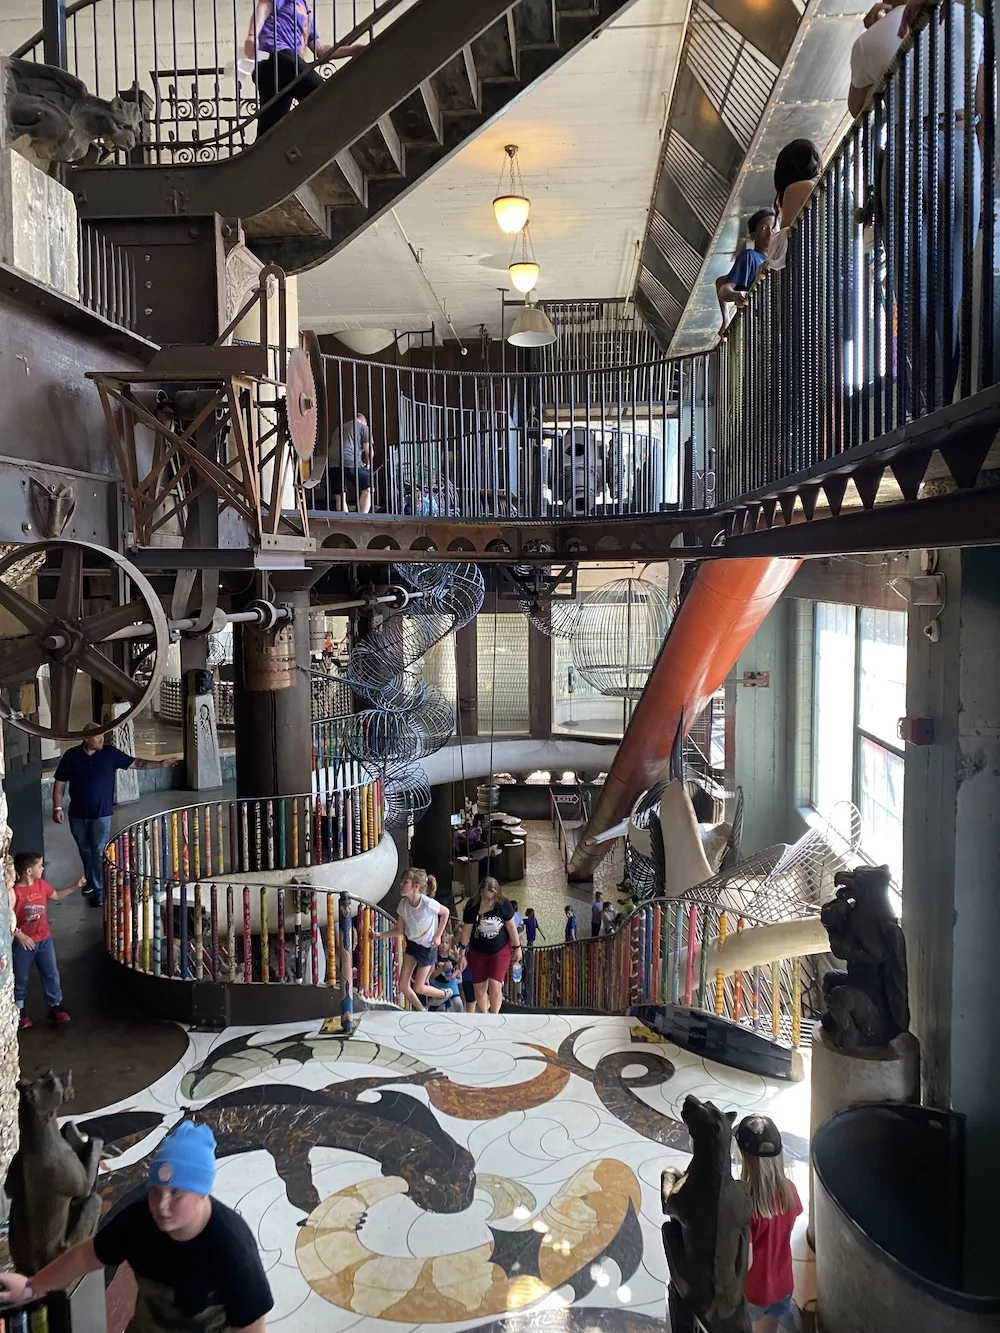 Interior staircase and giant slide at City Museum in St. Louis, Missouri